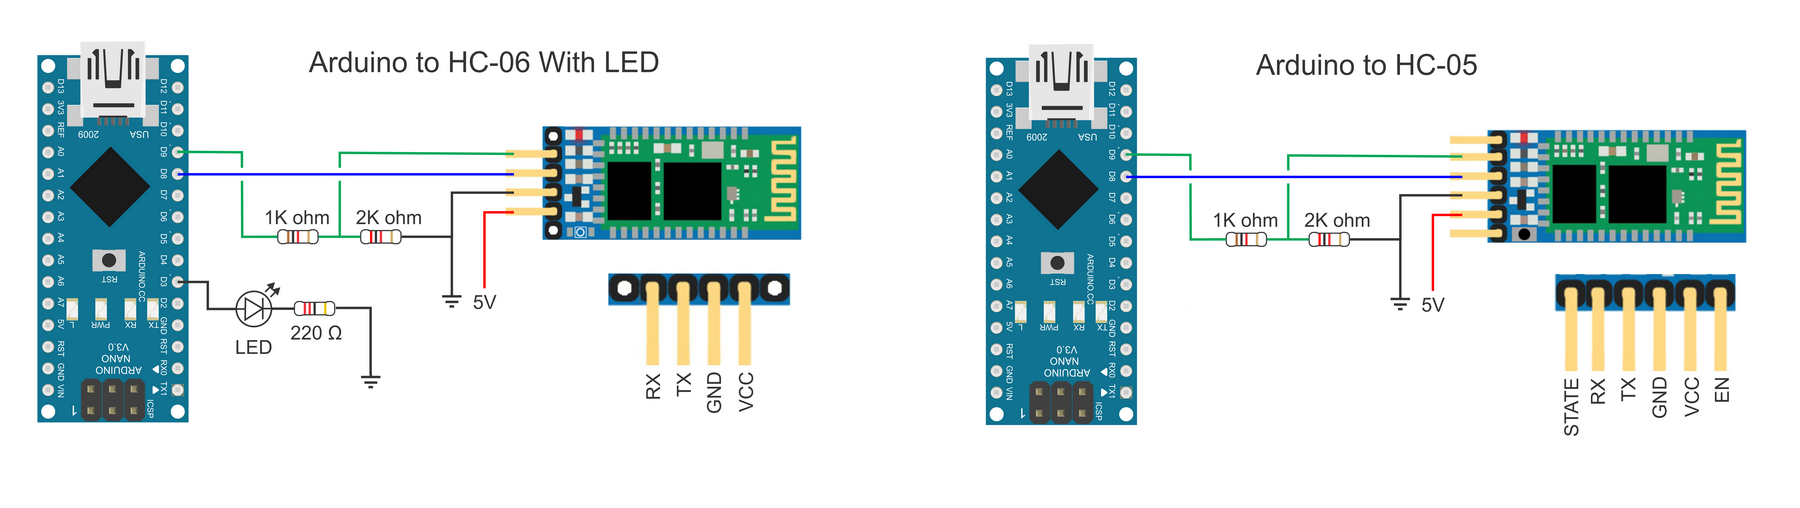 Video streaming using bluetooth? - Project Guidance - Arduino Forum